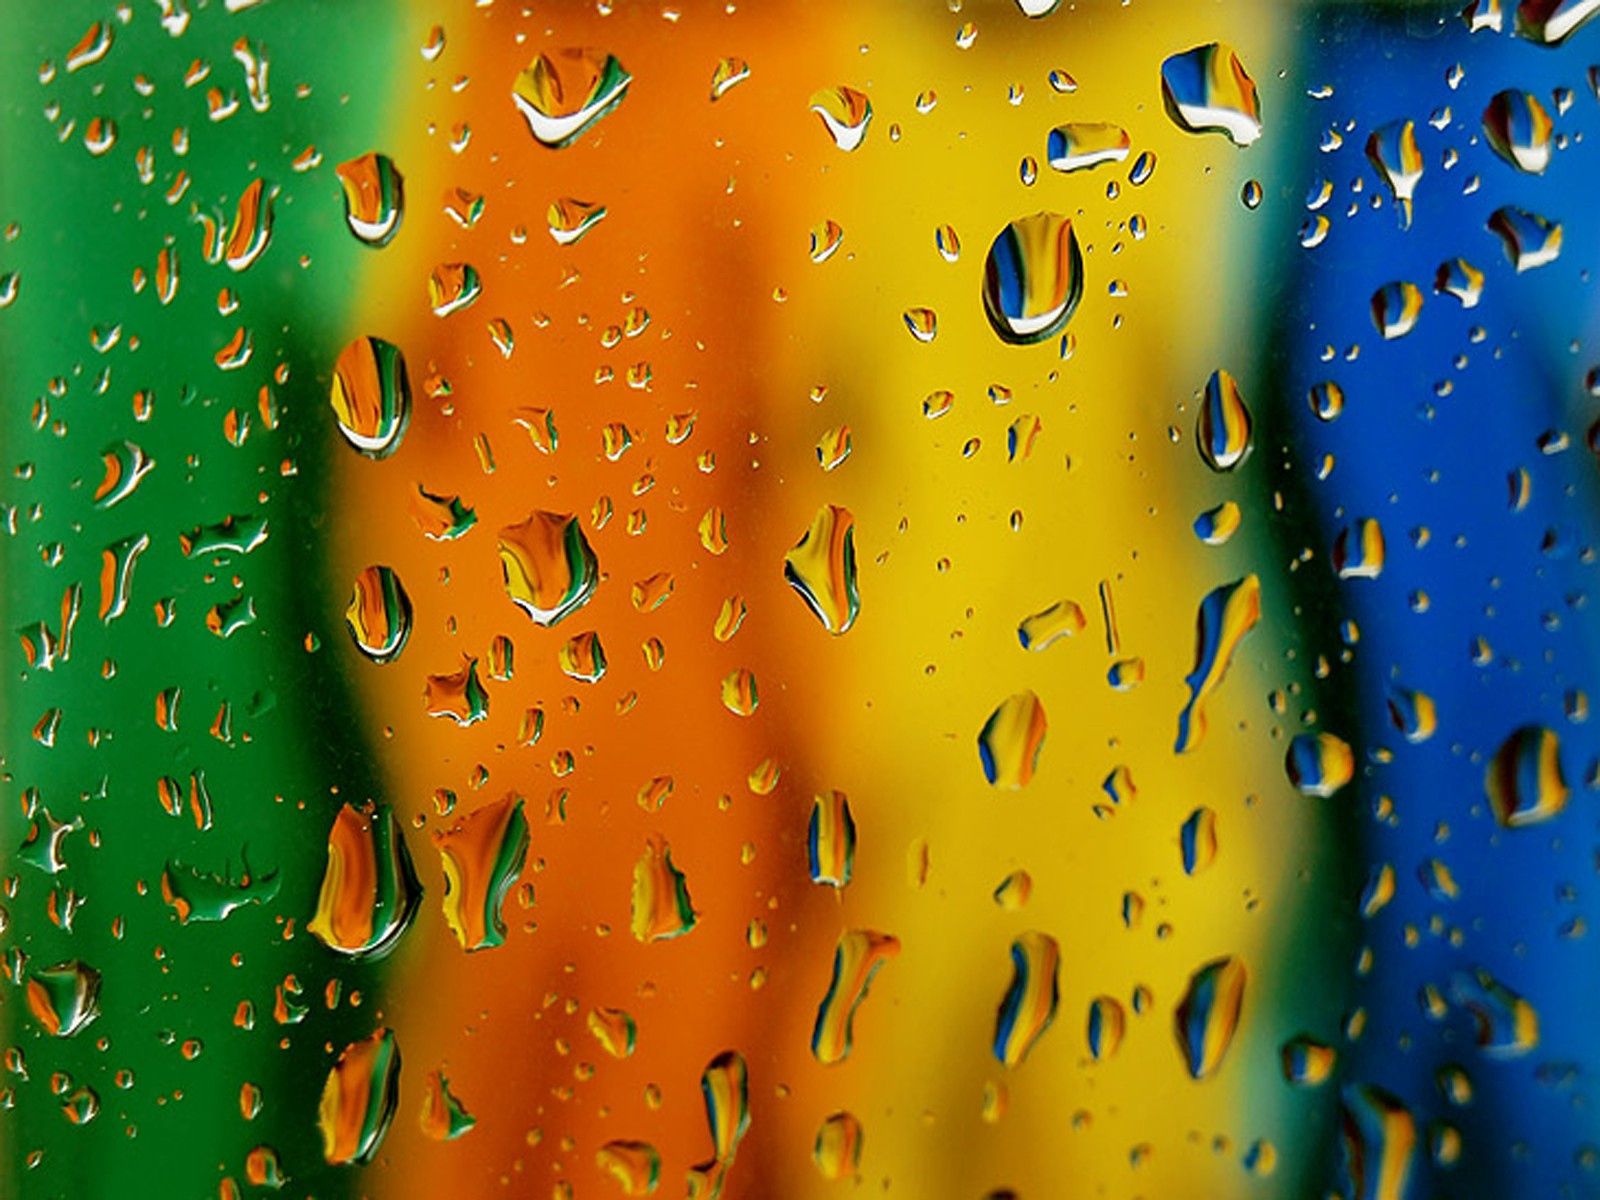 drops, multicolored, motley, texture, textures, surface cellphone